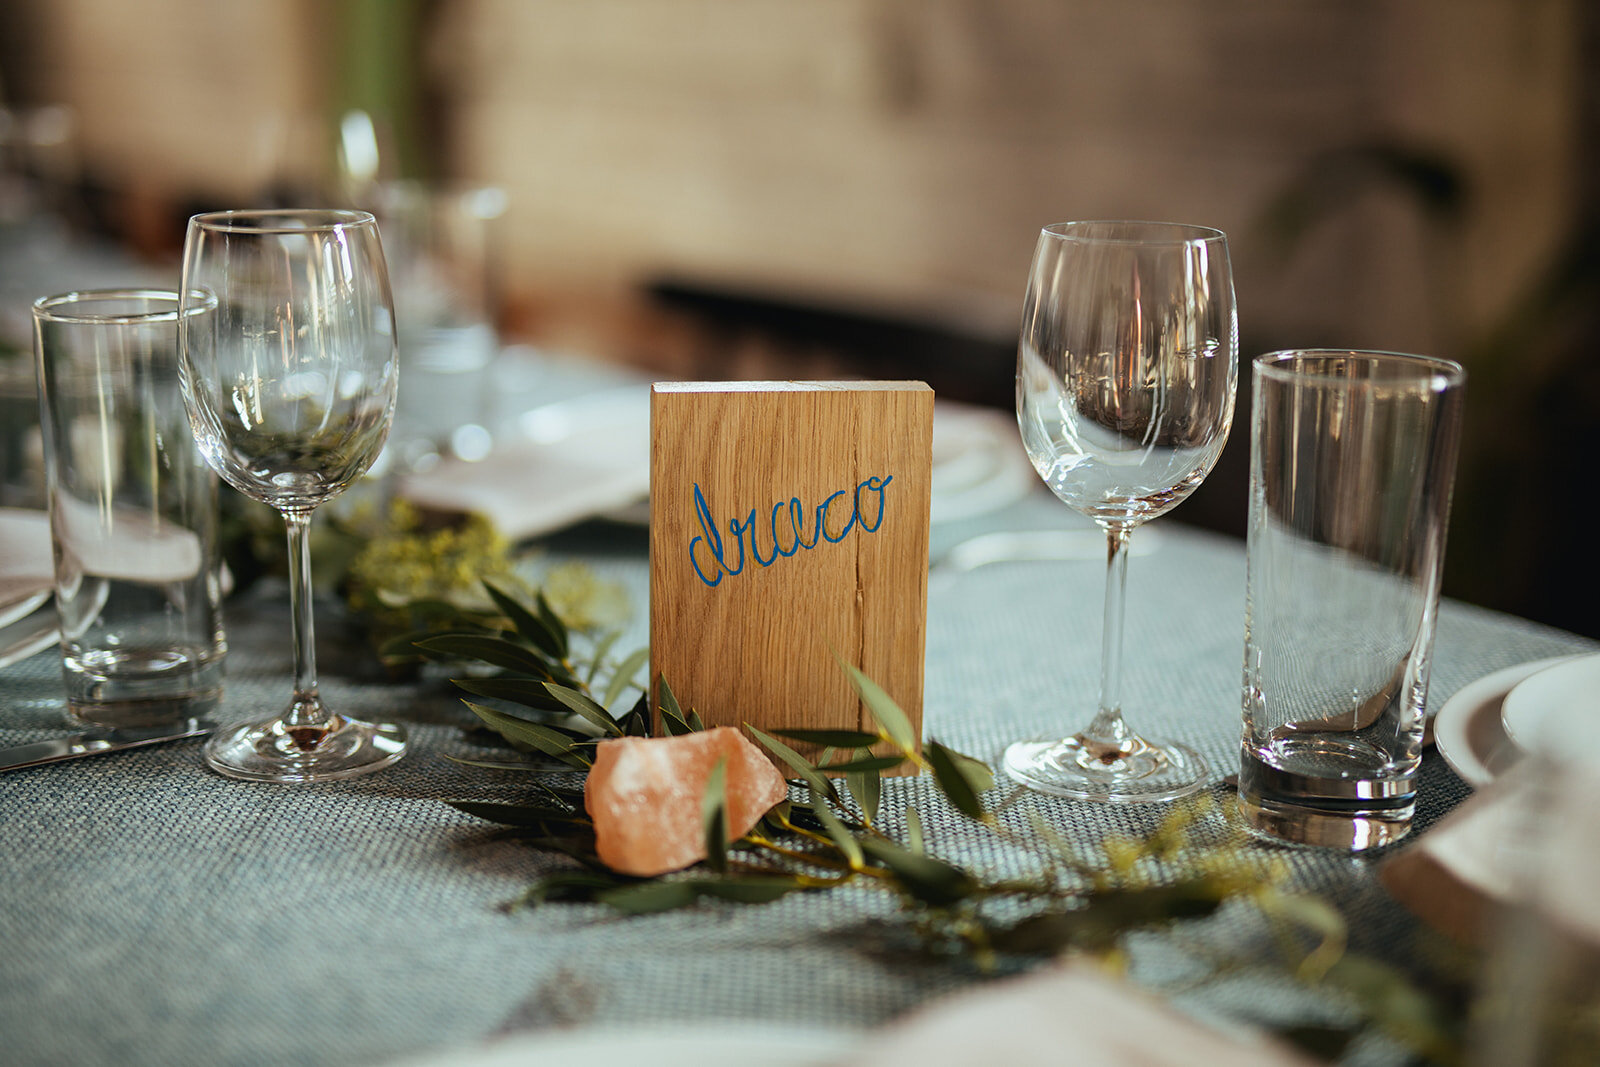 Table decor with a wooden name label by Marlow Events in Brooklyn Shawnee Custalow Queer Wedding Photographer